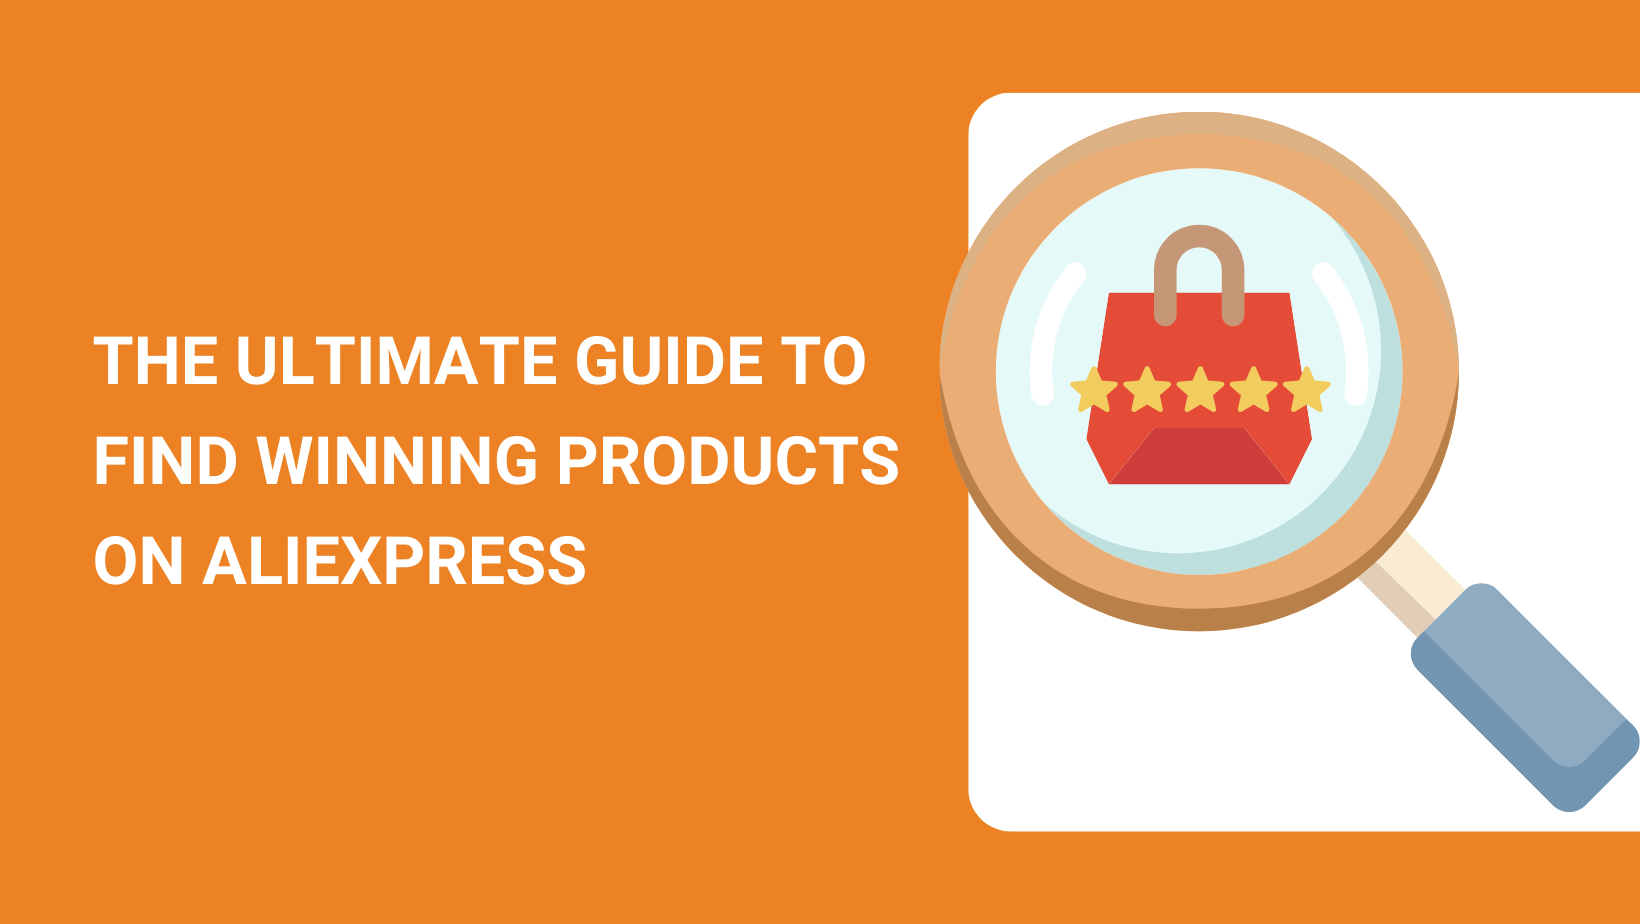 THE ULTIMATE GUIDE TO FIND WINNING PRODUCTS ON ALIEXPRESS